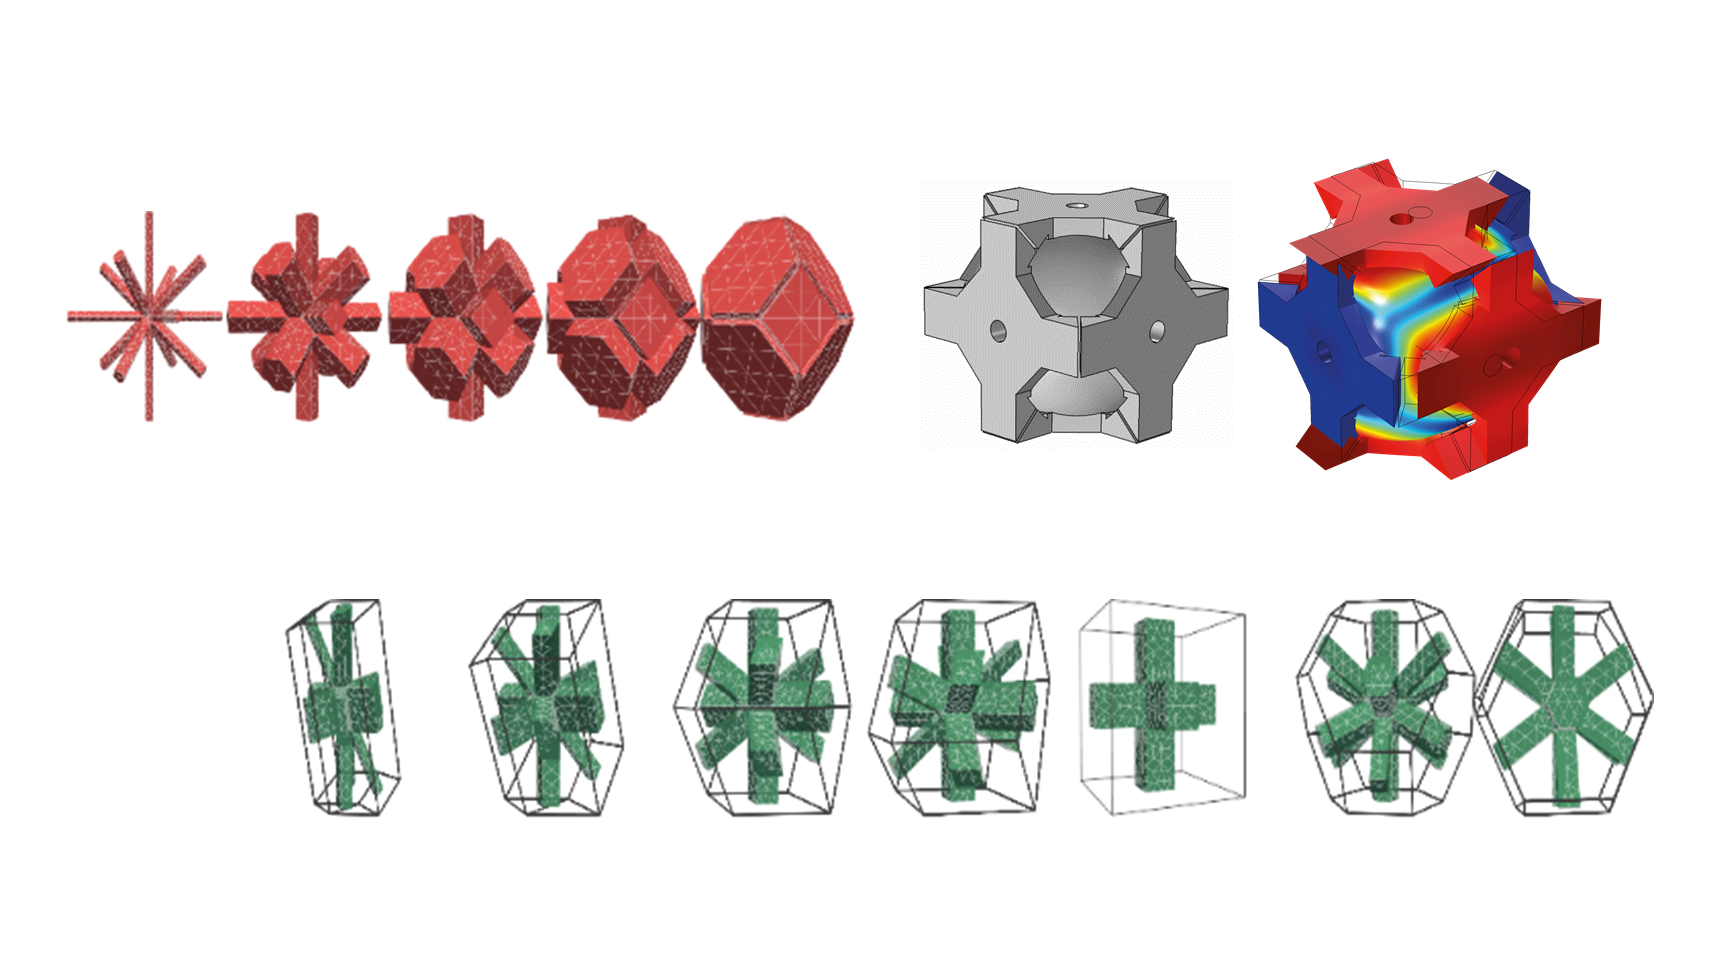 3D graphic representations of various crystalline structures